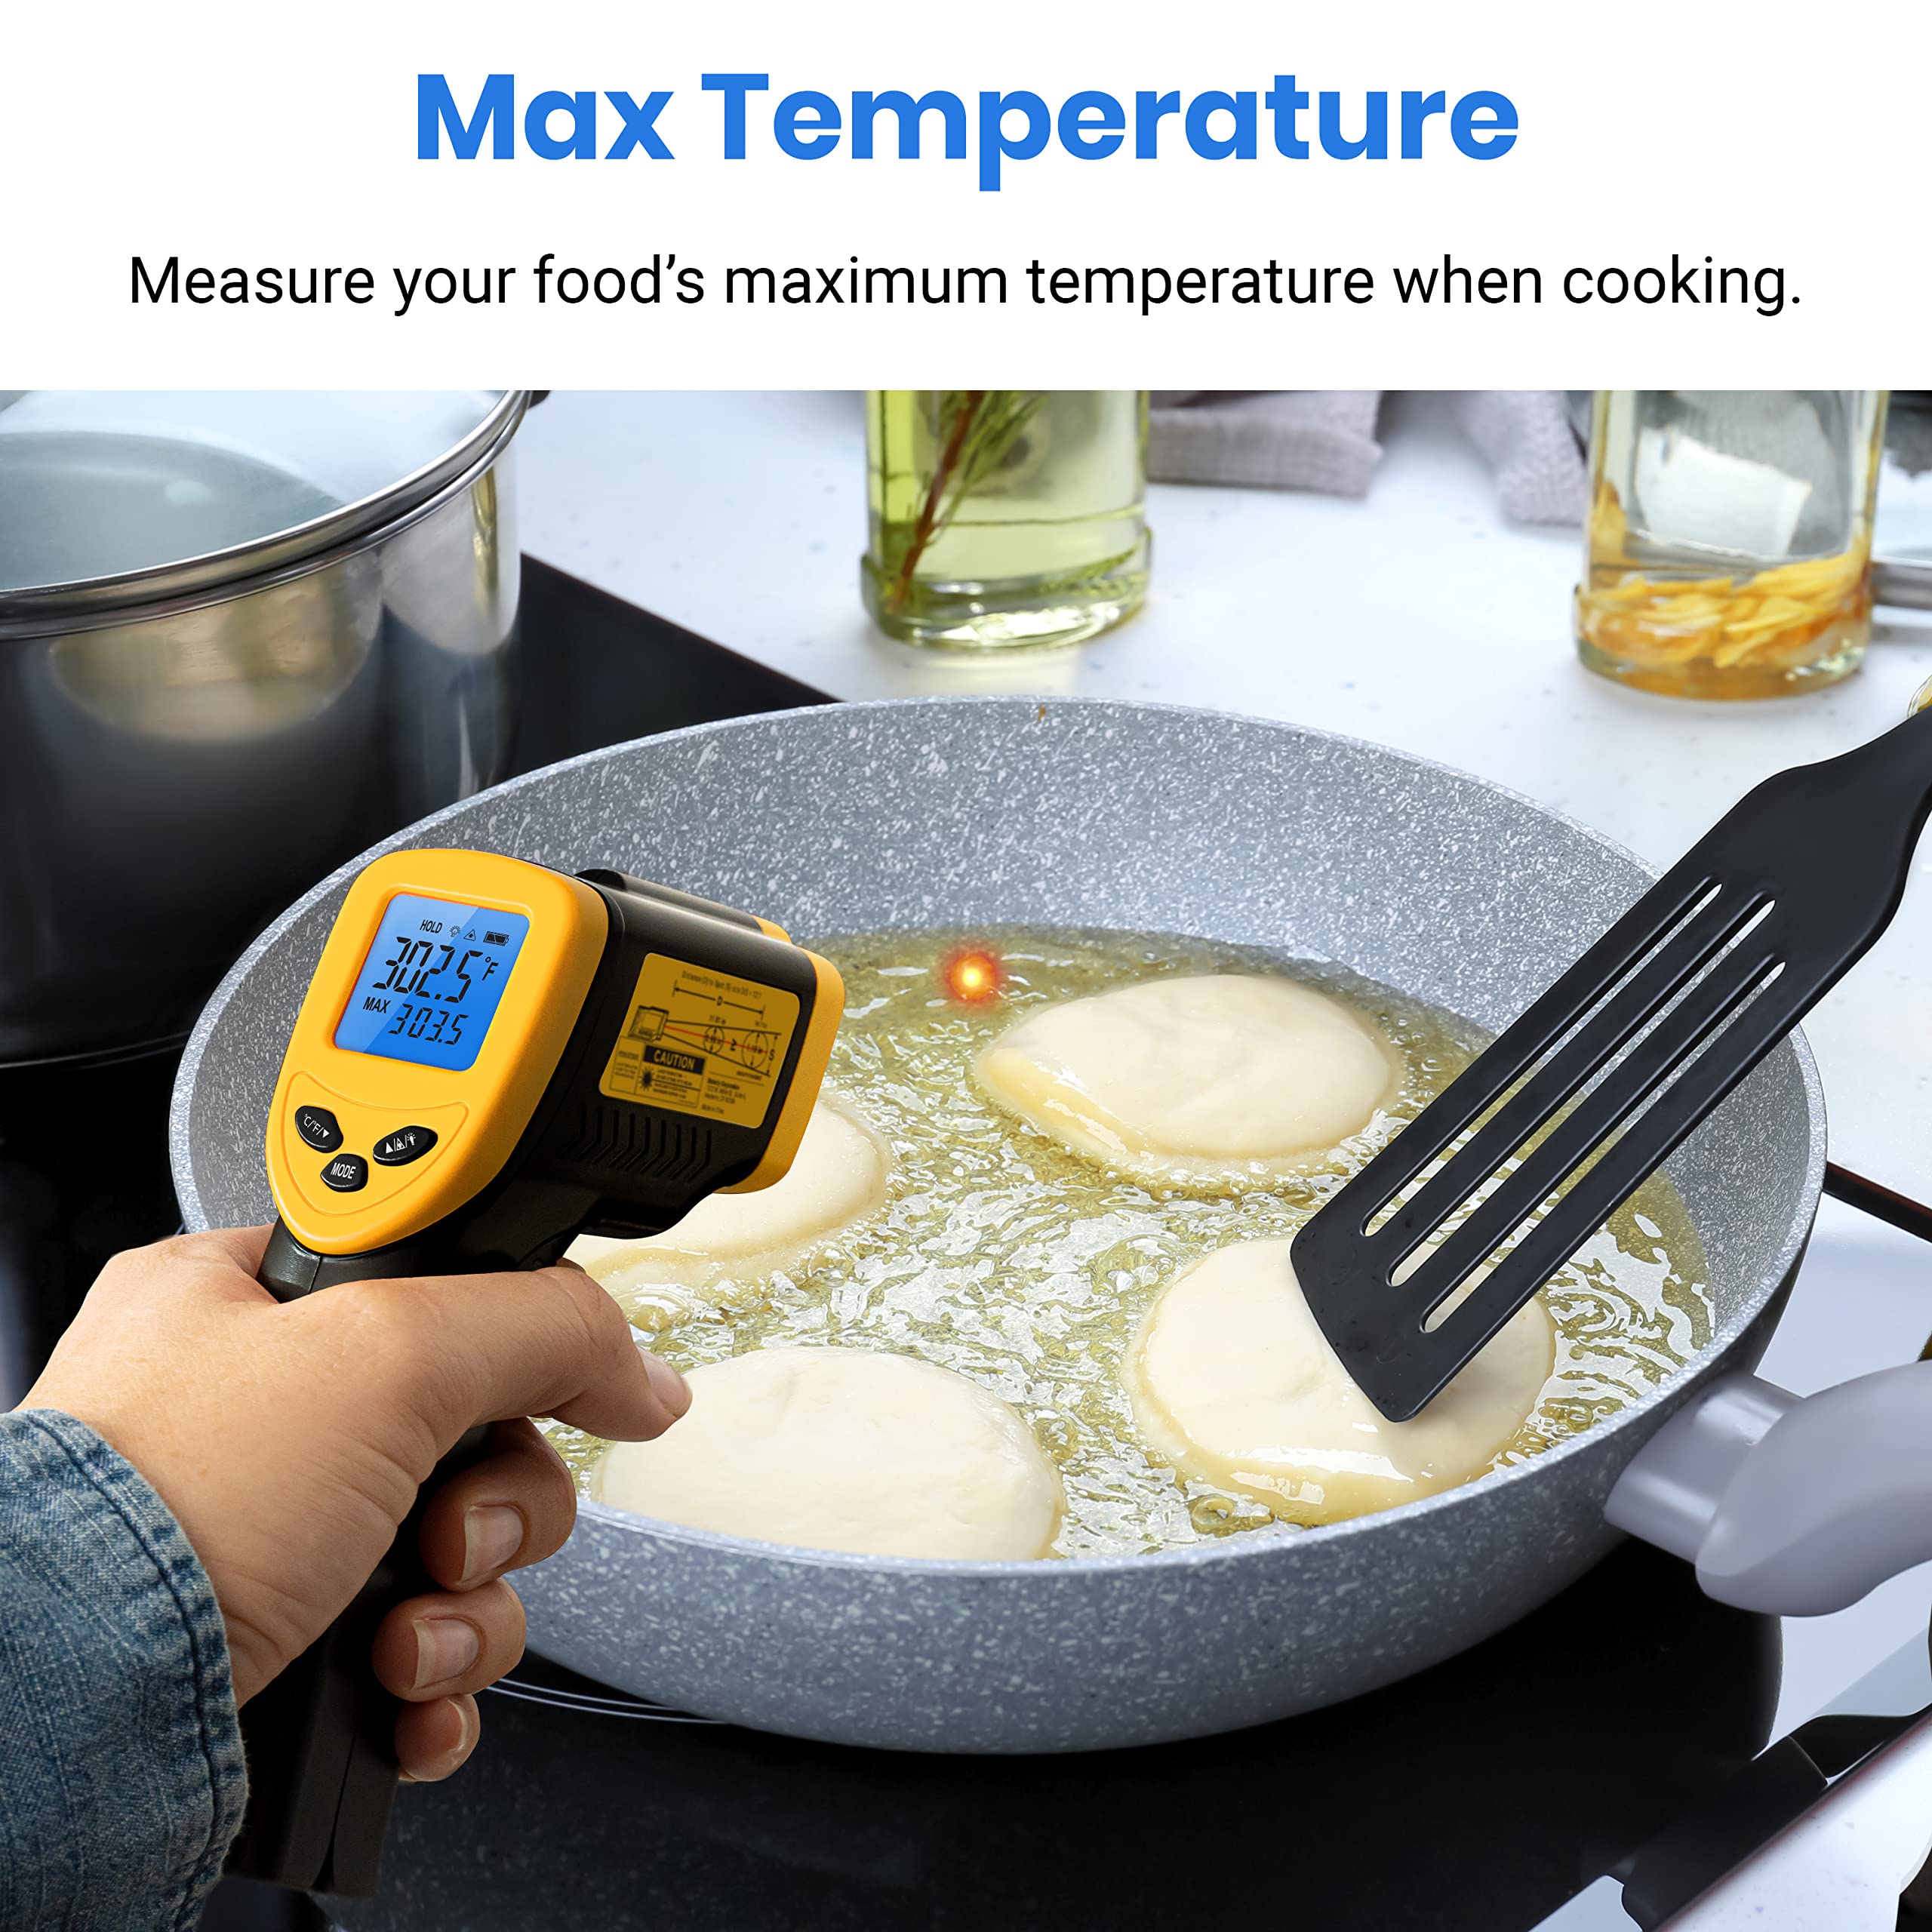 Etekcity Infrared Thermometer 1080, Pizza Oven, Blackstone Accessories, Temperature Temp Gun for Cooking, Laser Pool Surface Tool for Kitchen, HVAC, Griddle, Grill, -58°F to 1130°F, Yellow